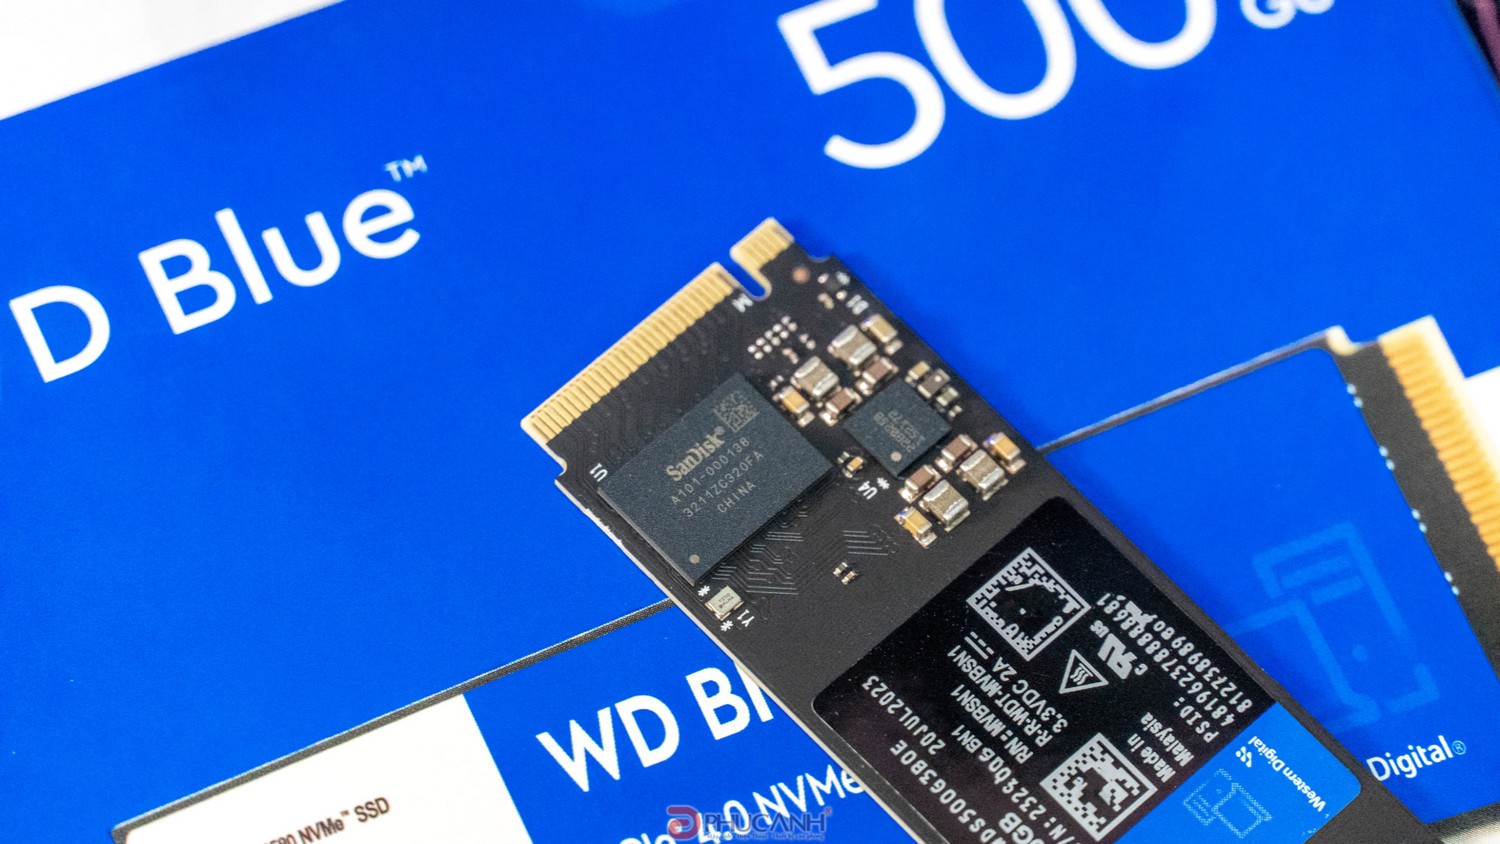 Review SSD WD Blue SN580